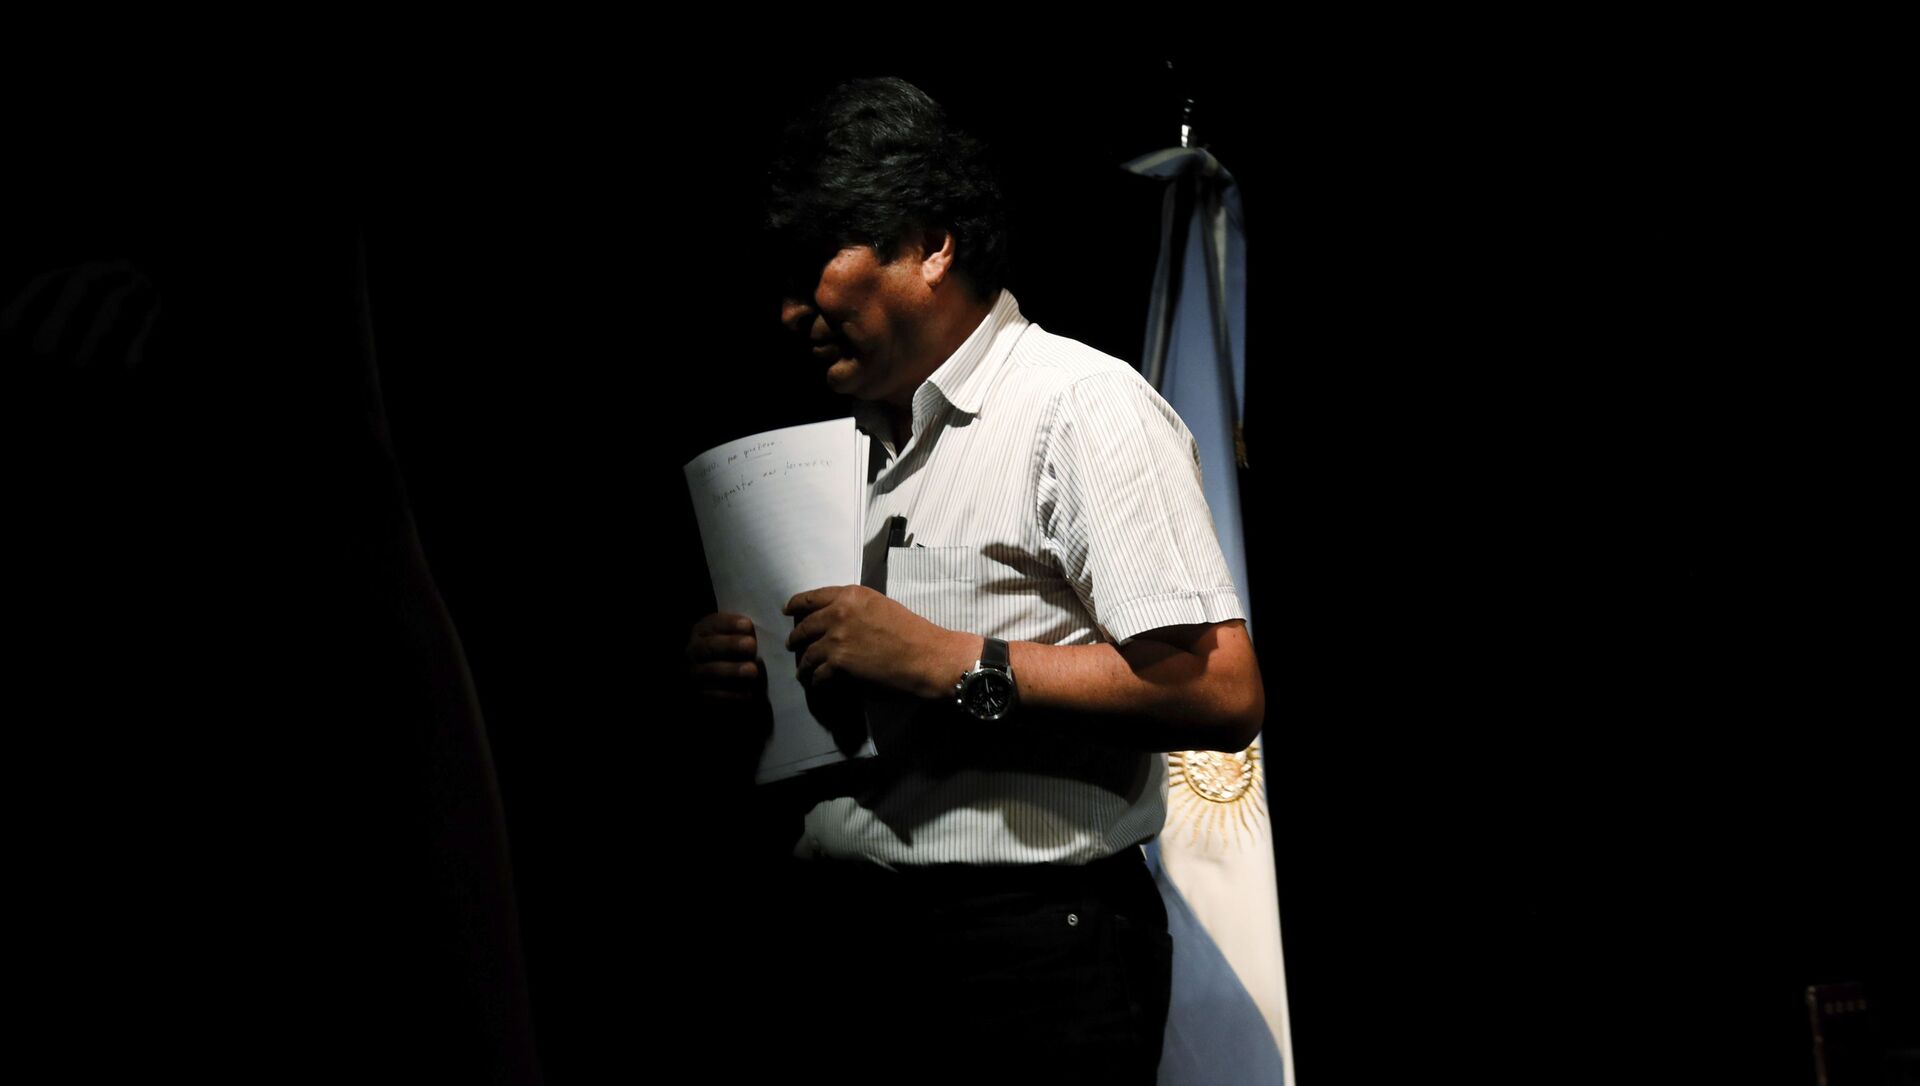 Bolivia's former President Evo Morales leaves after giving a news conference in Buenos Aires, Argentina, Thursday, Dec. 19, 2019. Morales resigned on Nov. 10 after a wave of protests alleging fraud in elections that would have given him a fourth term in office. Now living in Argentina, Morales says his removal was a coup d' etat following the loss of support by police and military.  - Sputnik International, 1920, 11.03.2021